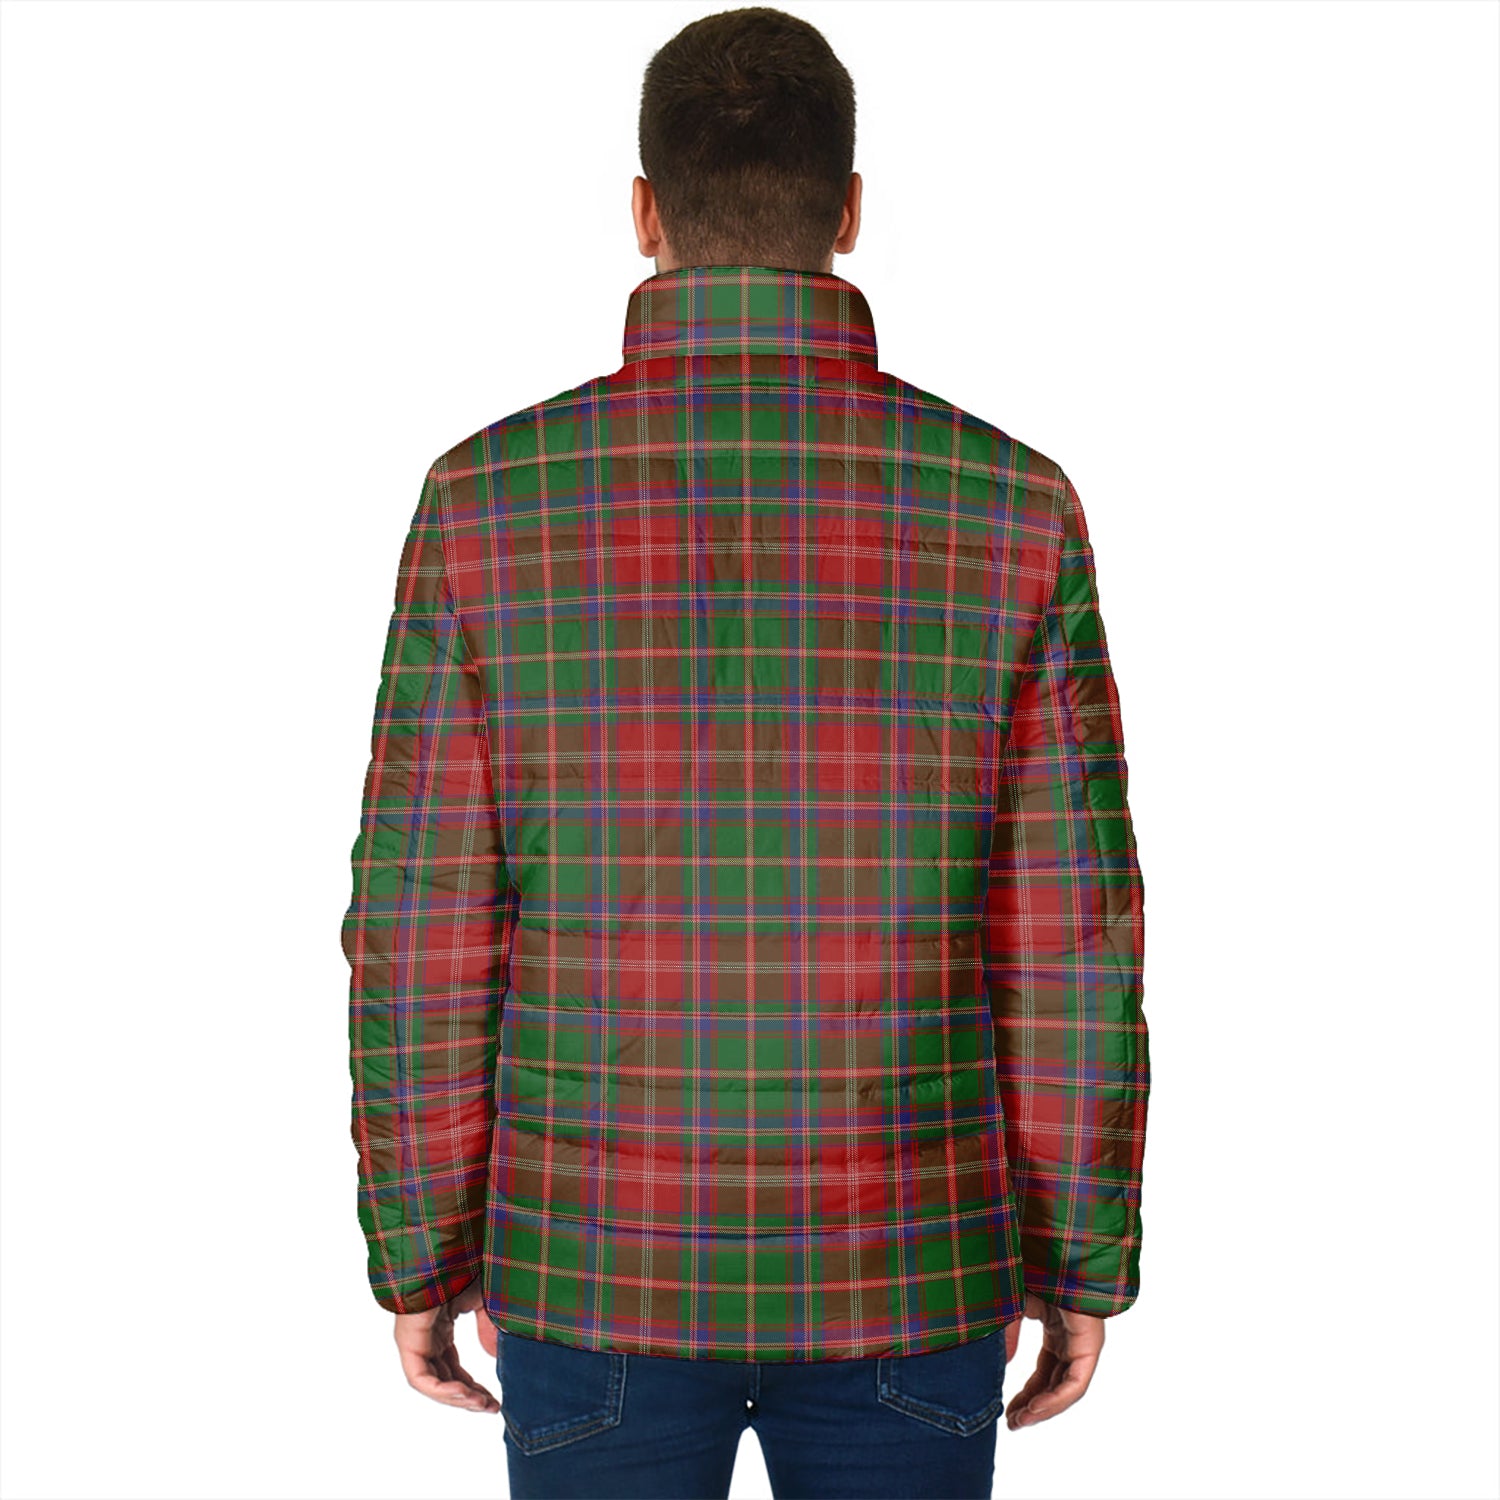 somerville-tartan-padded-jacket-with-family-crest